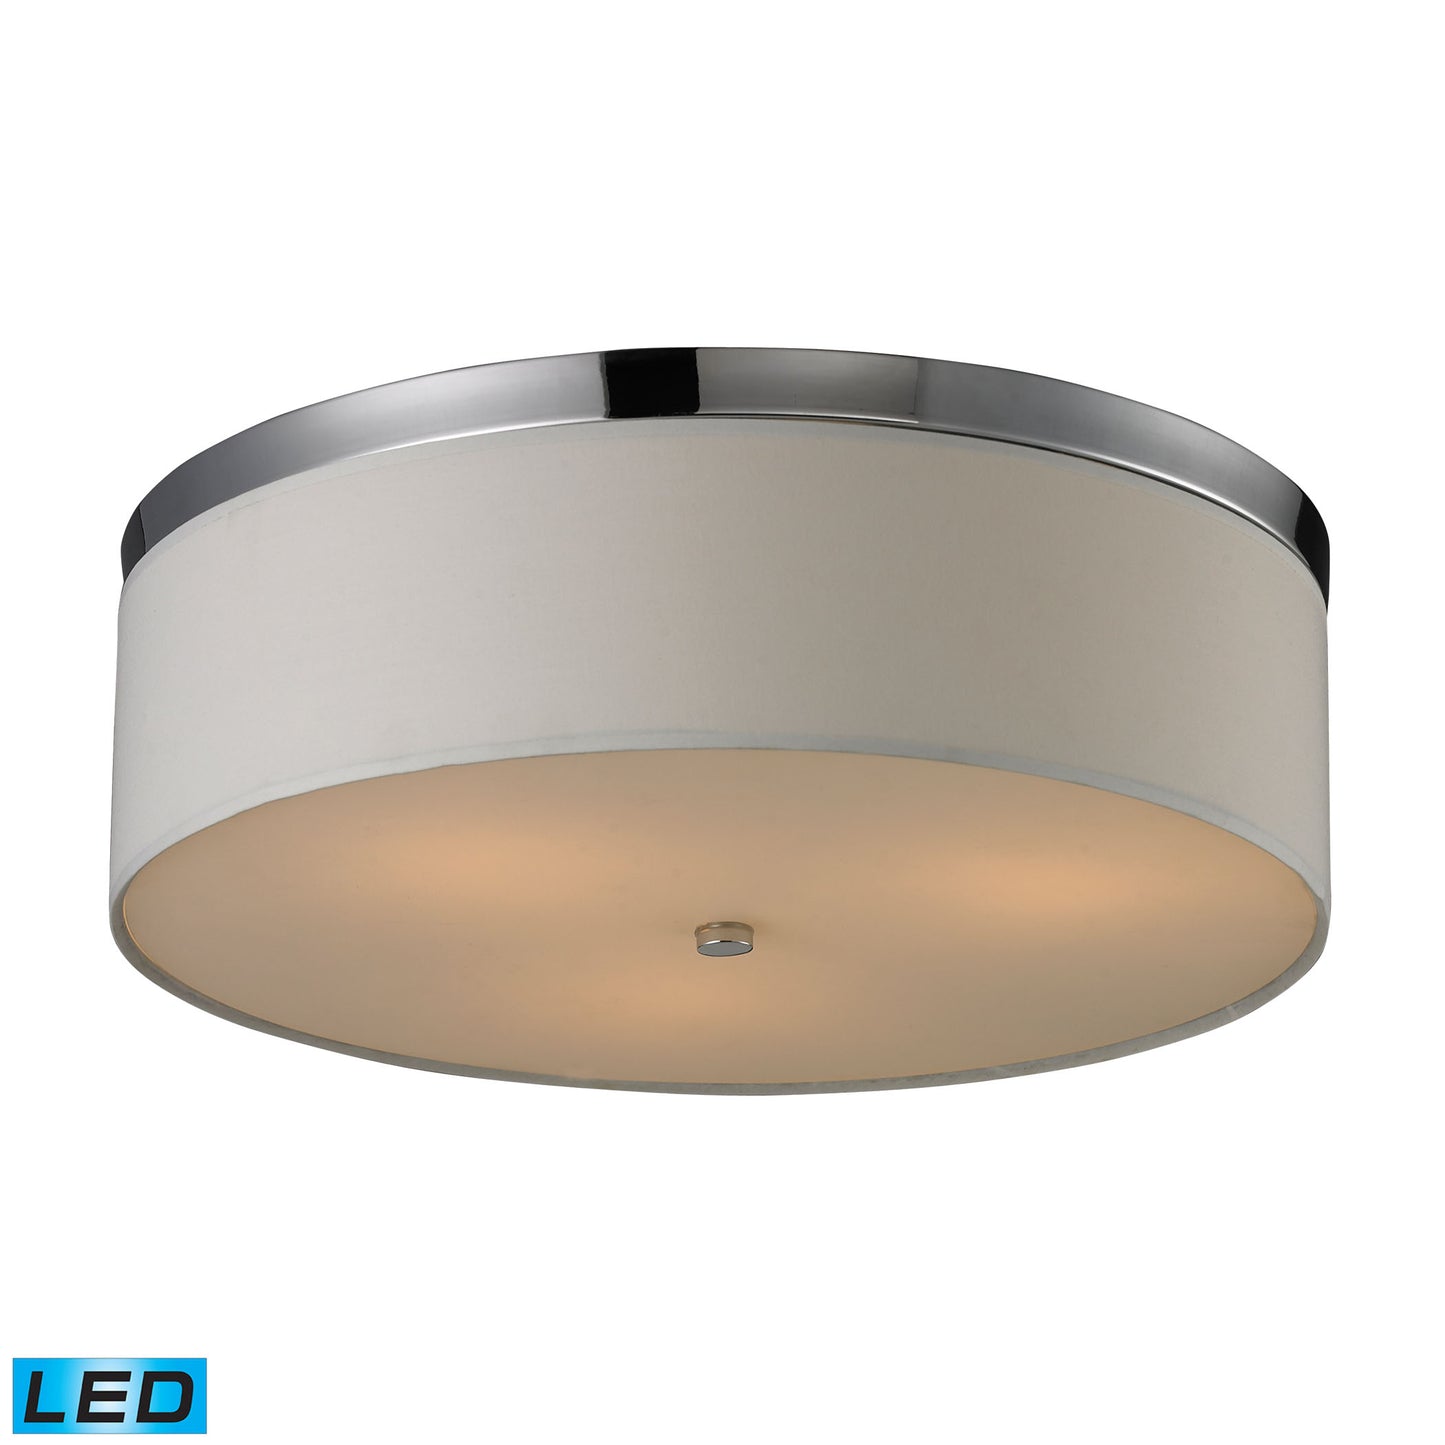 Flushmounts 3-Light Flush Mount in Polished Chrome with Diffuser - Includes LED Bulbs